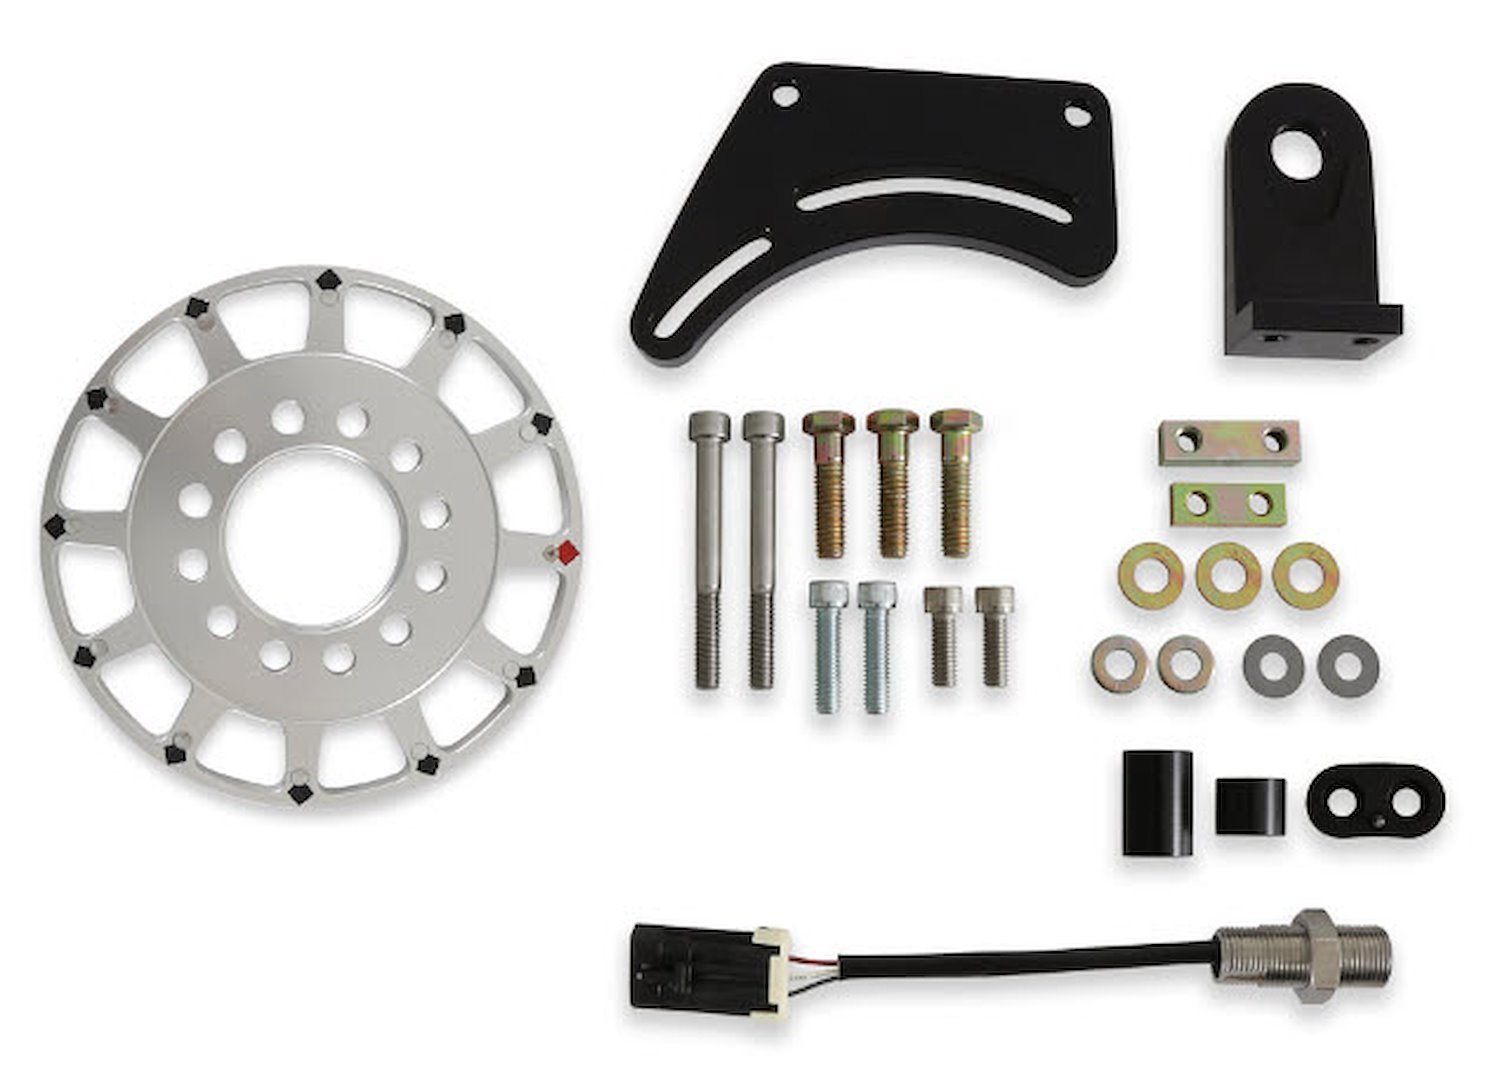 EFI Crank Trigger System for Ford Coyote Engines (7 in.)